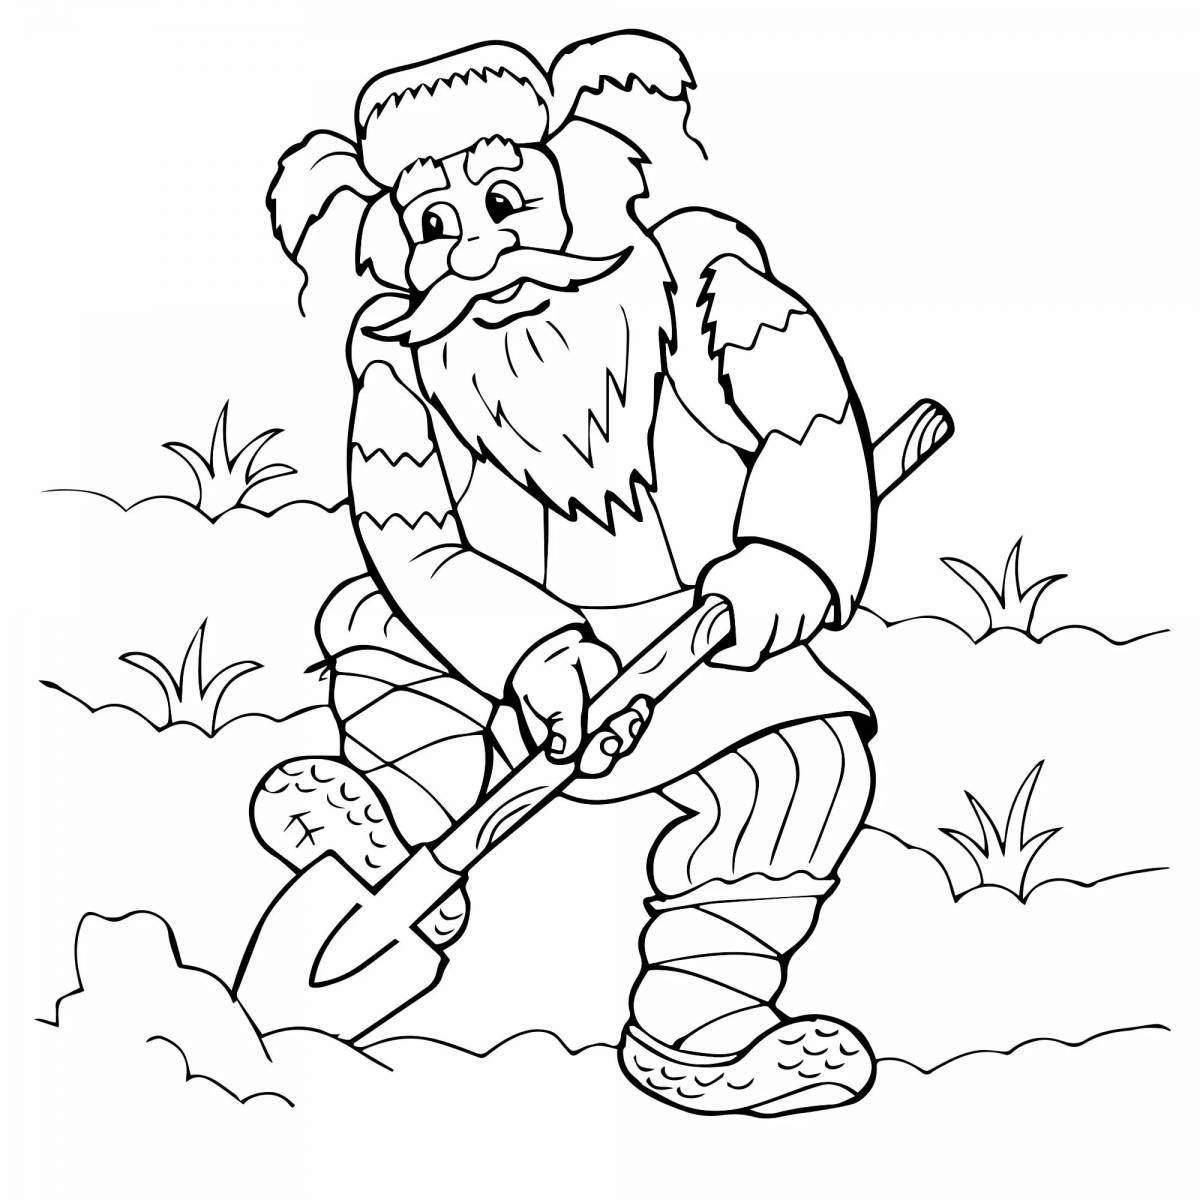 Coloring page charming grandfather